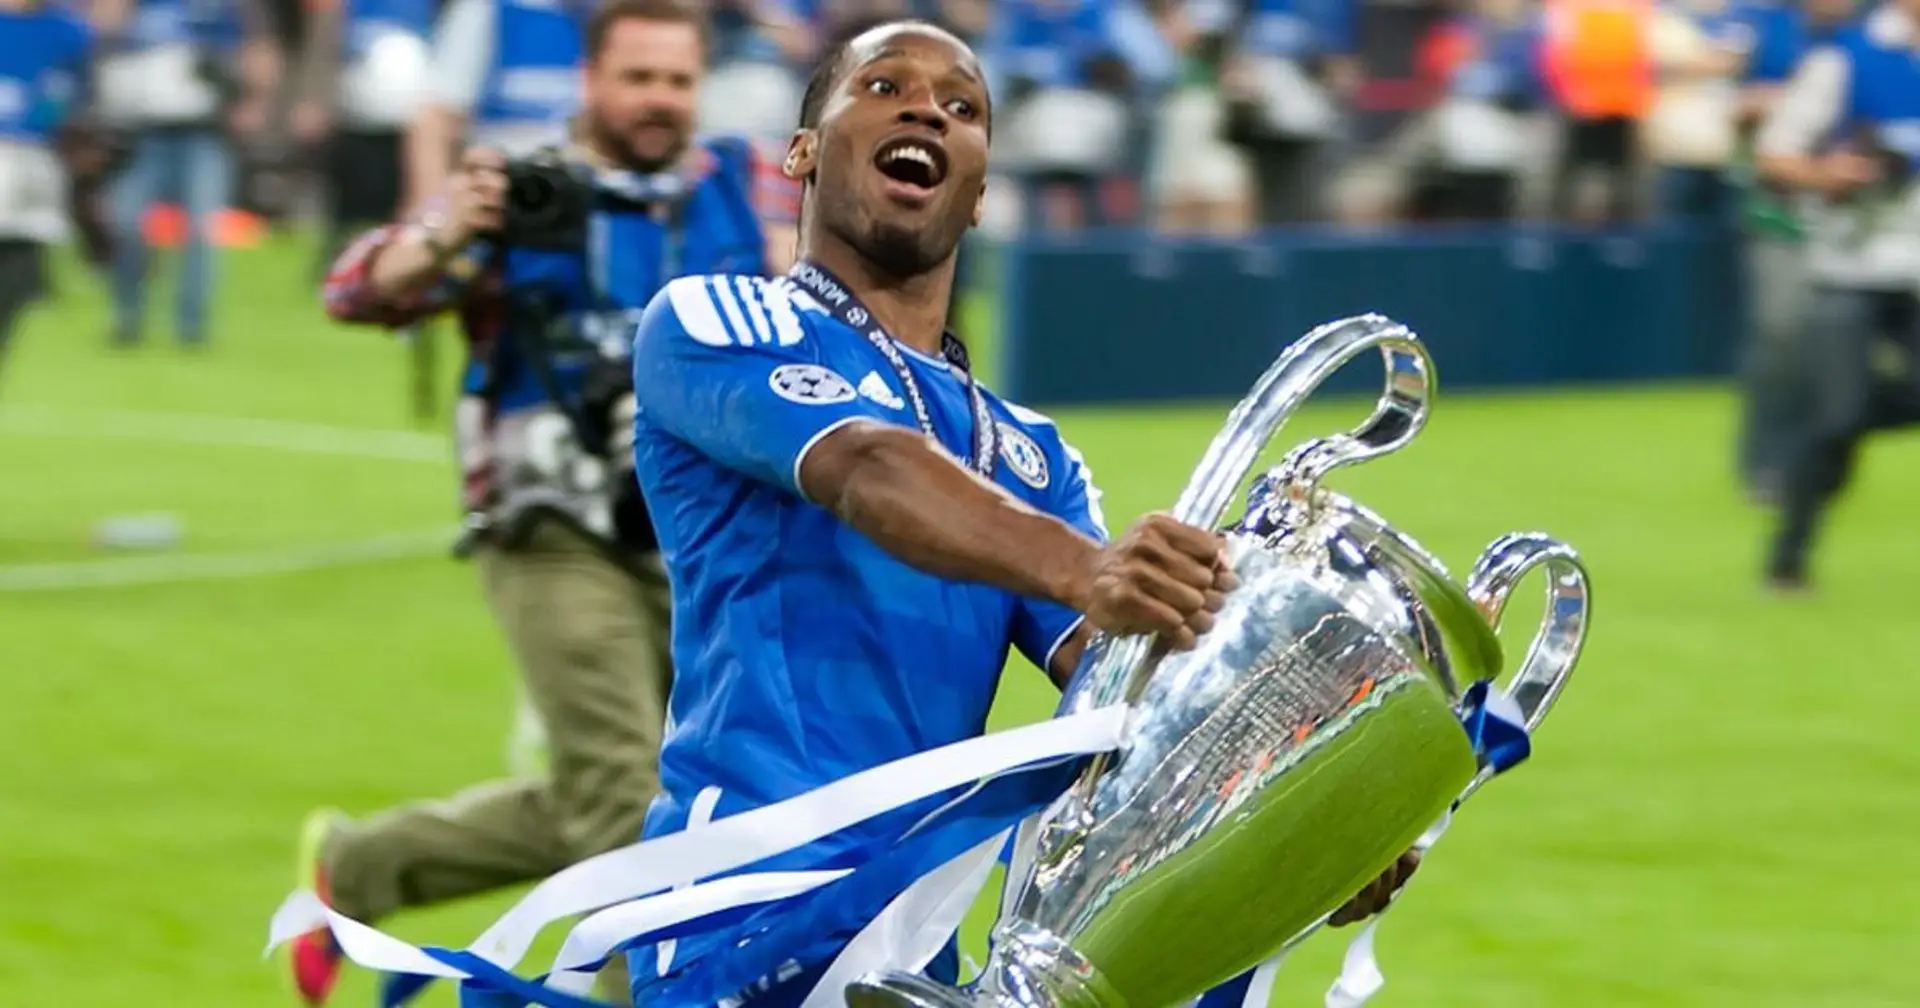 'Only rivals want Chelsea to sell Drogba': How Blues predicted future in response to controversial article in 2009